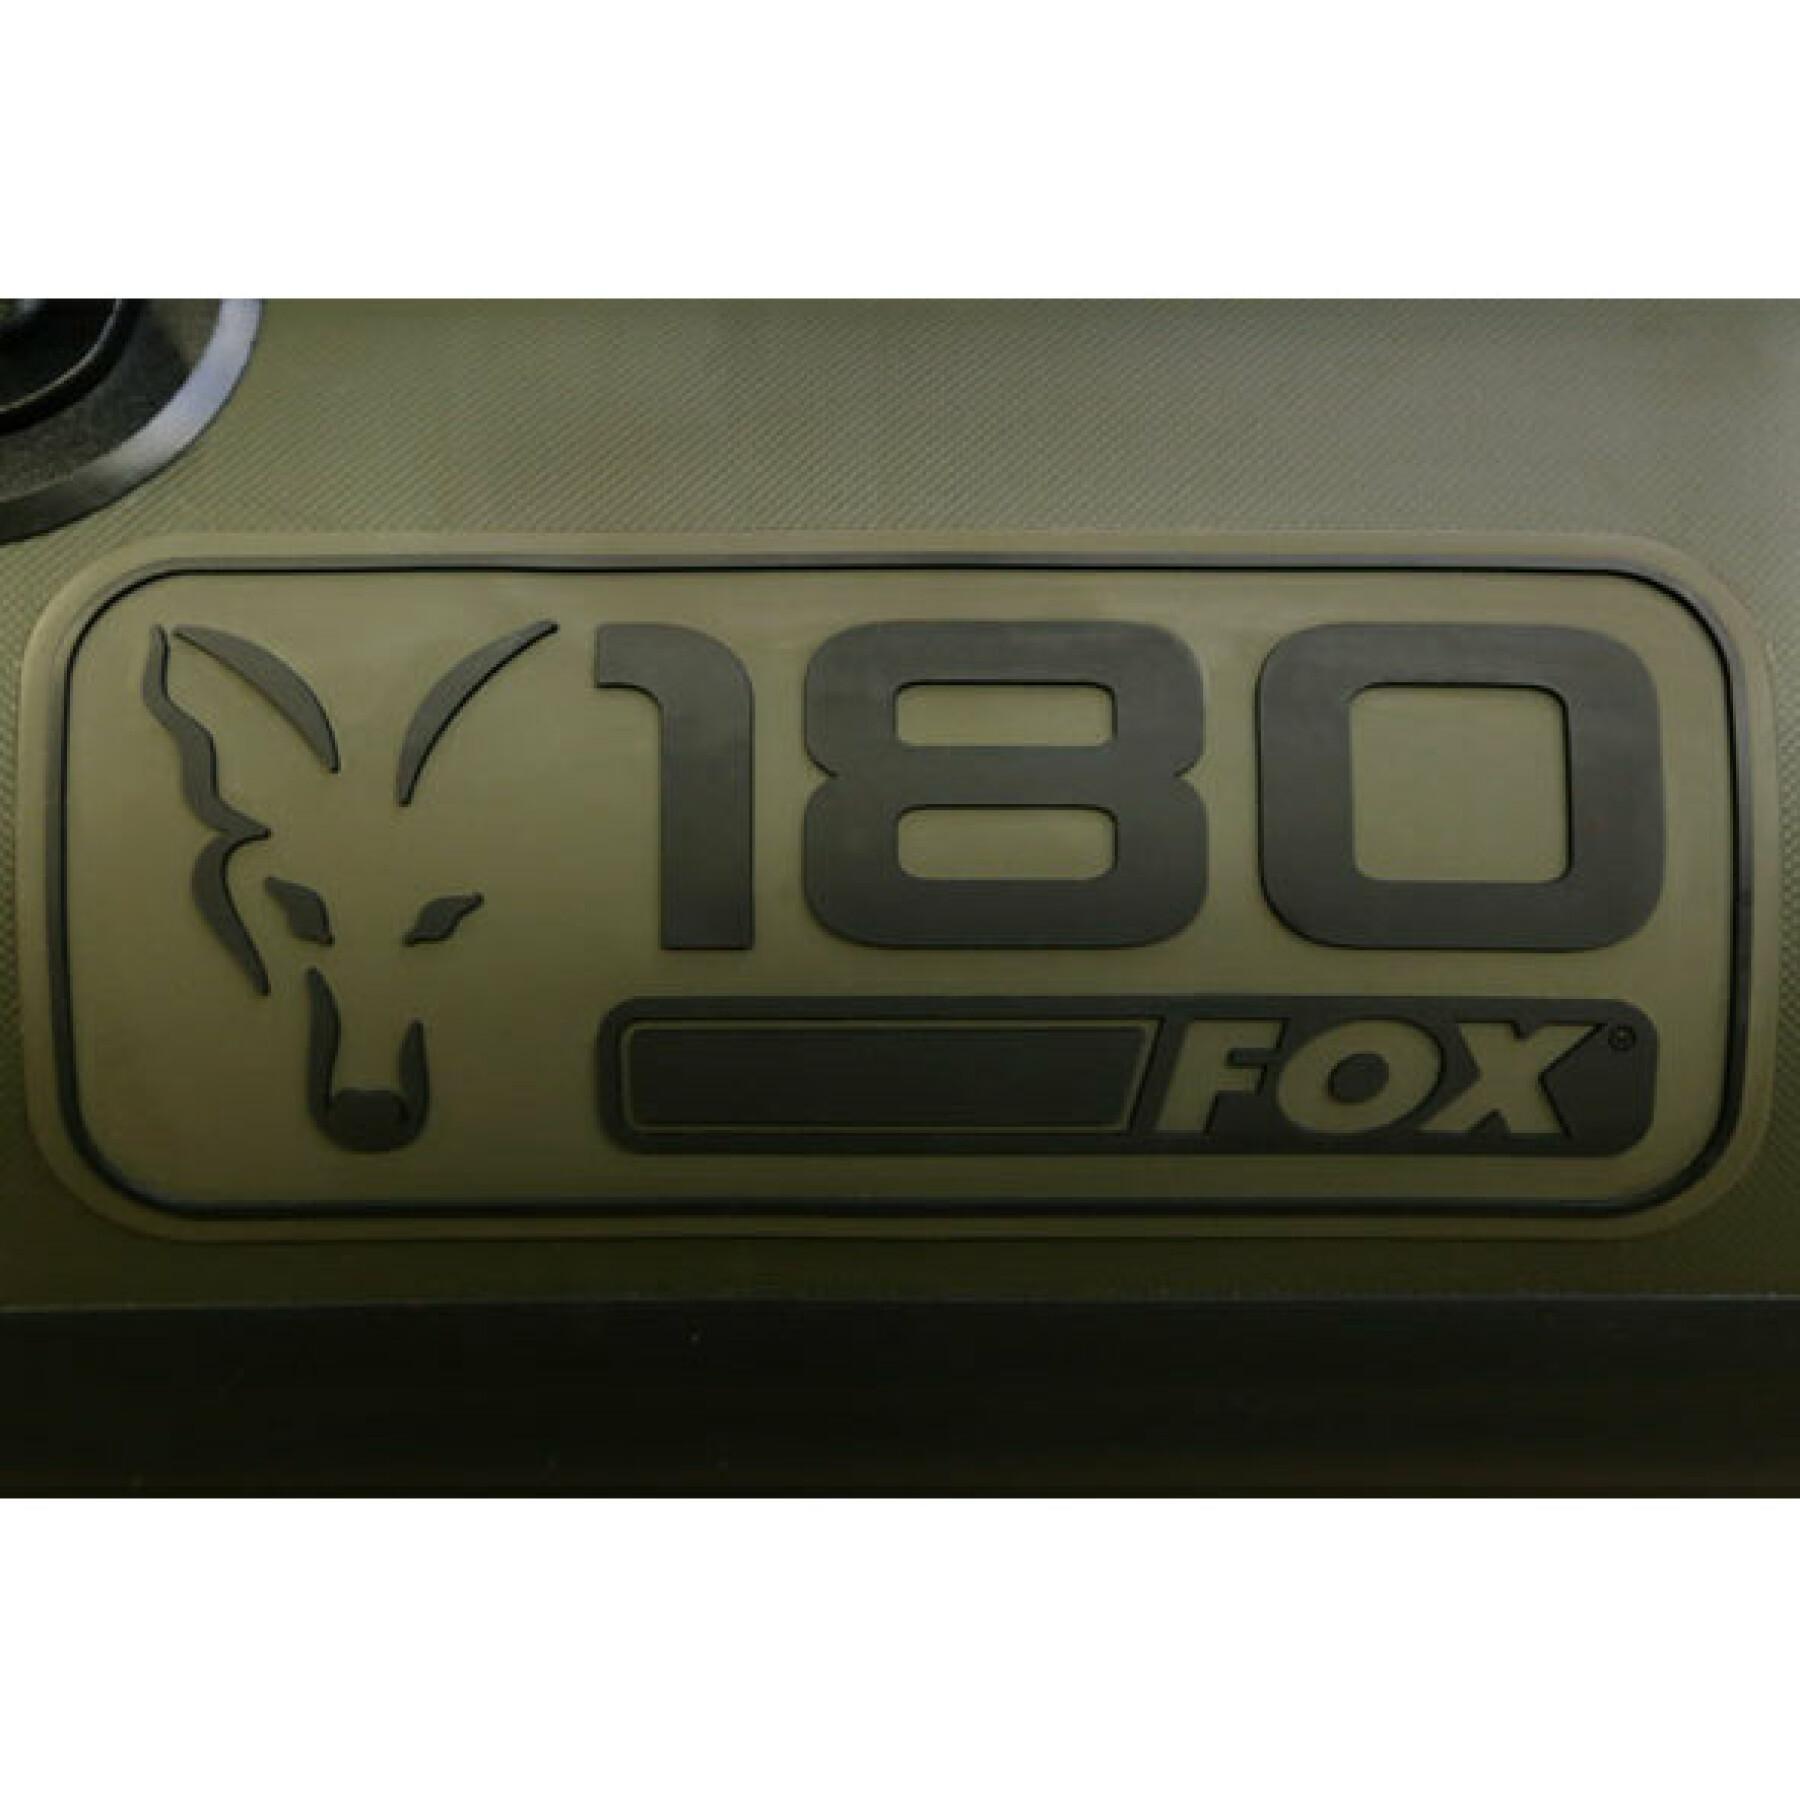 Barco inflable Fox 180